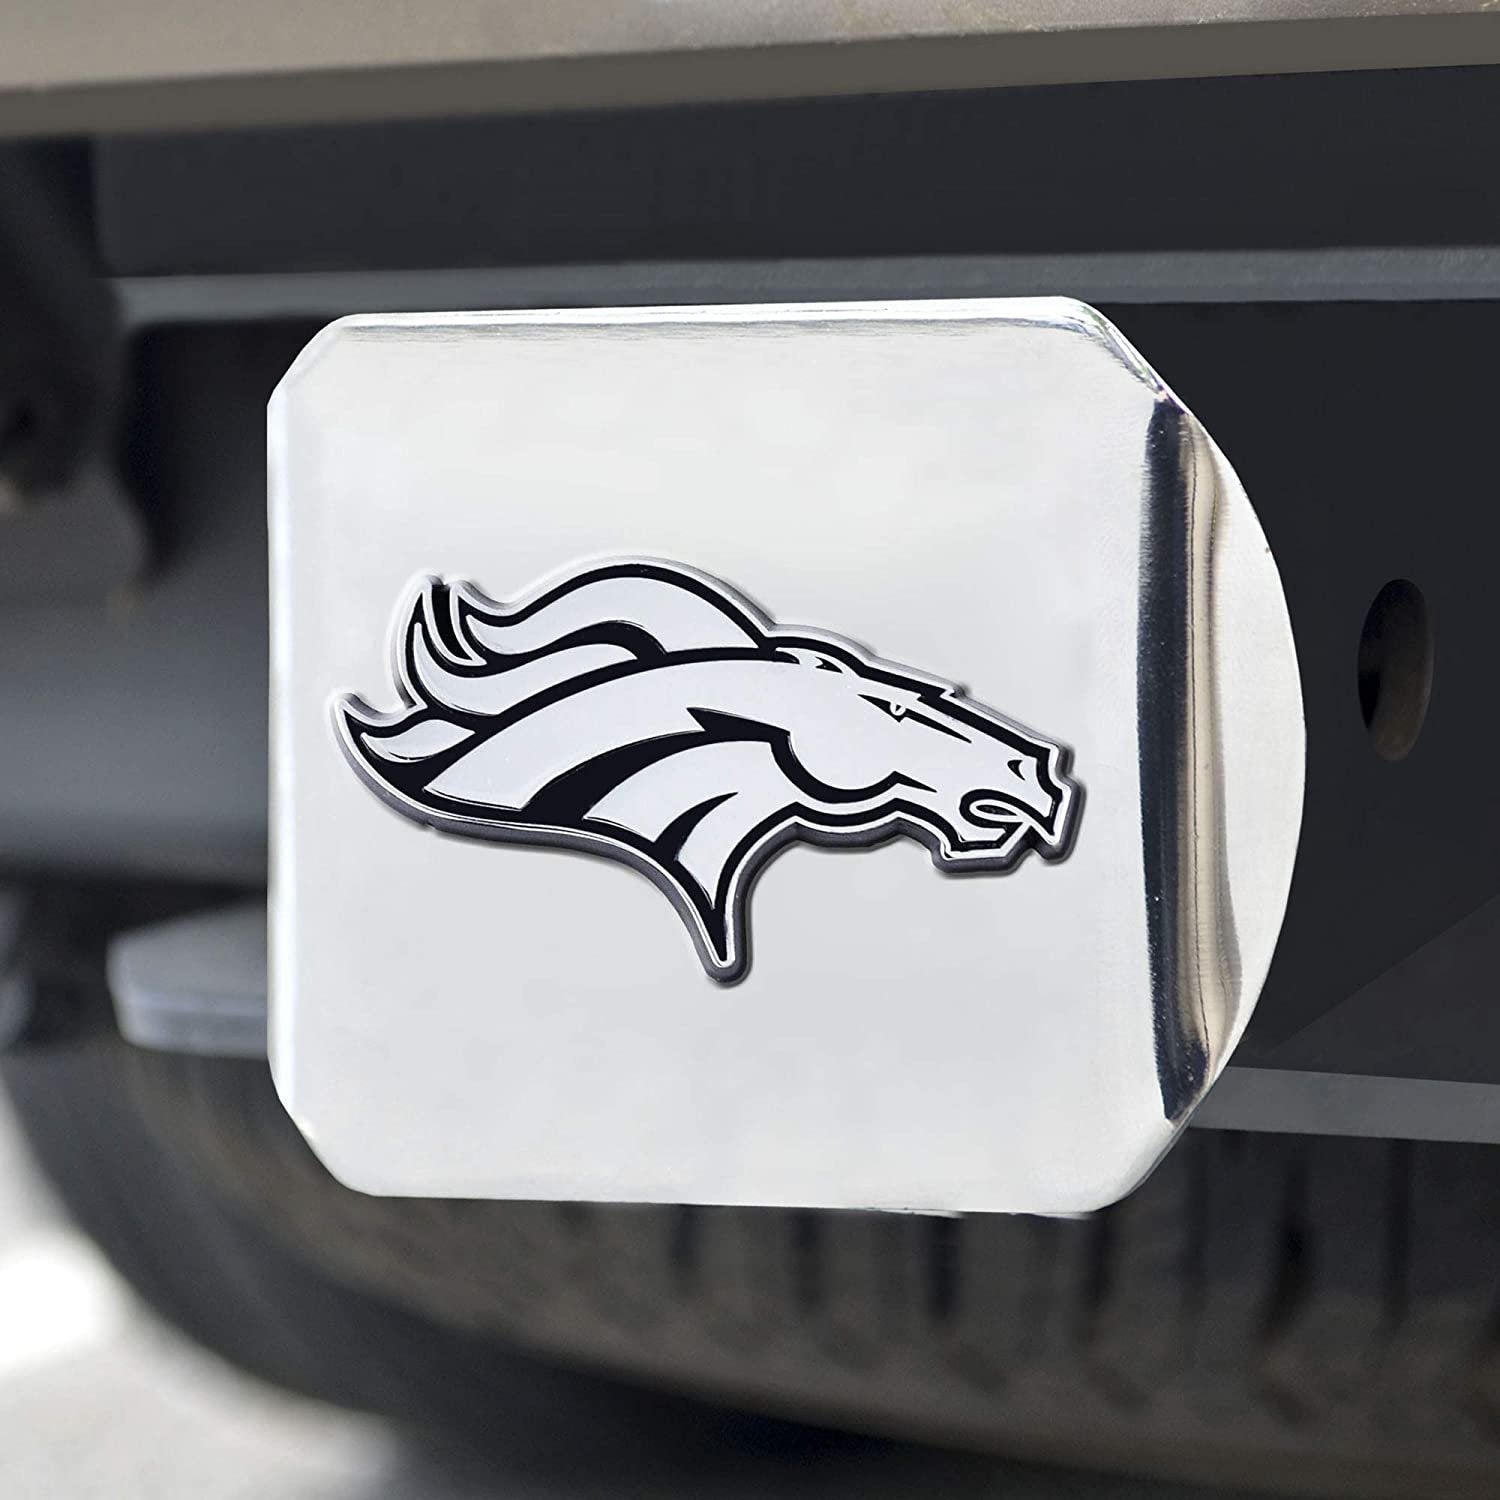 Denver Broncos Solid Metal Hitch Cover with Chrome Metal Emblem 2 Inch Square Type III